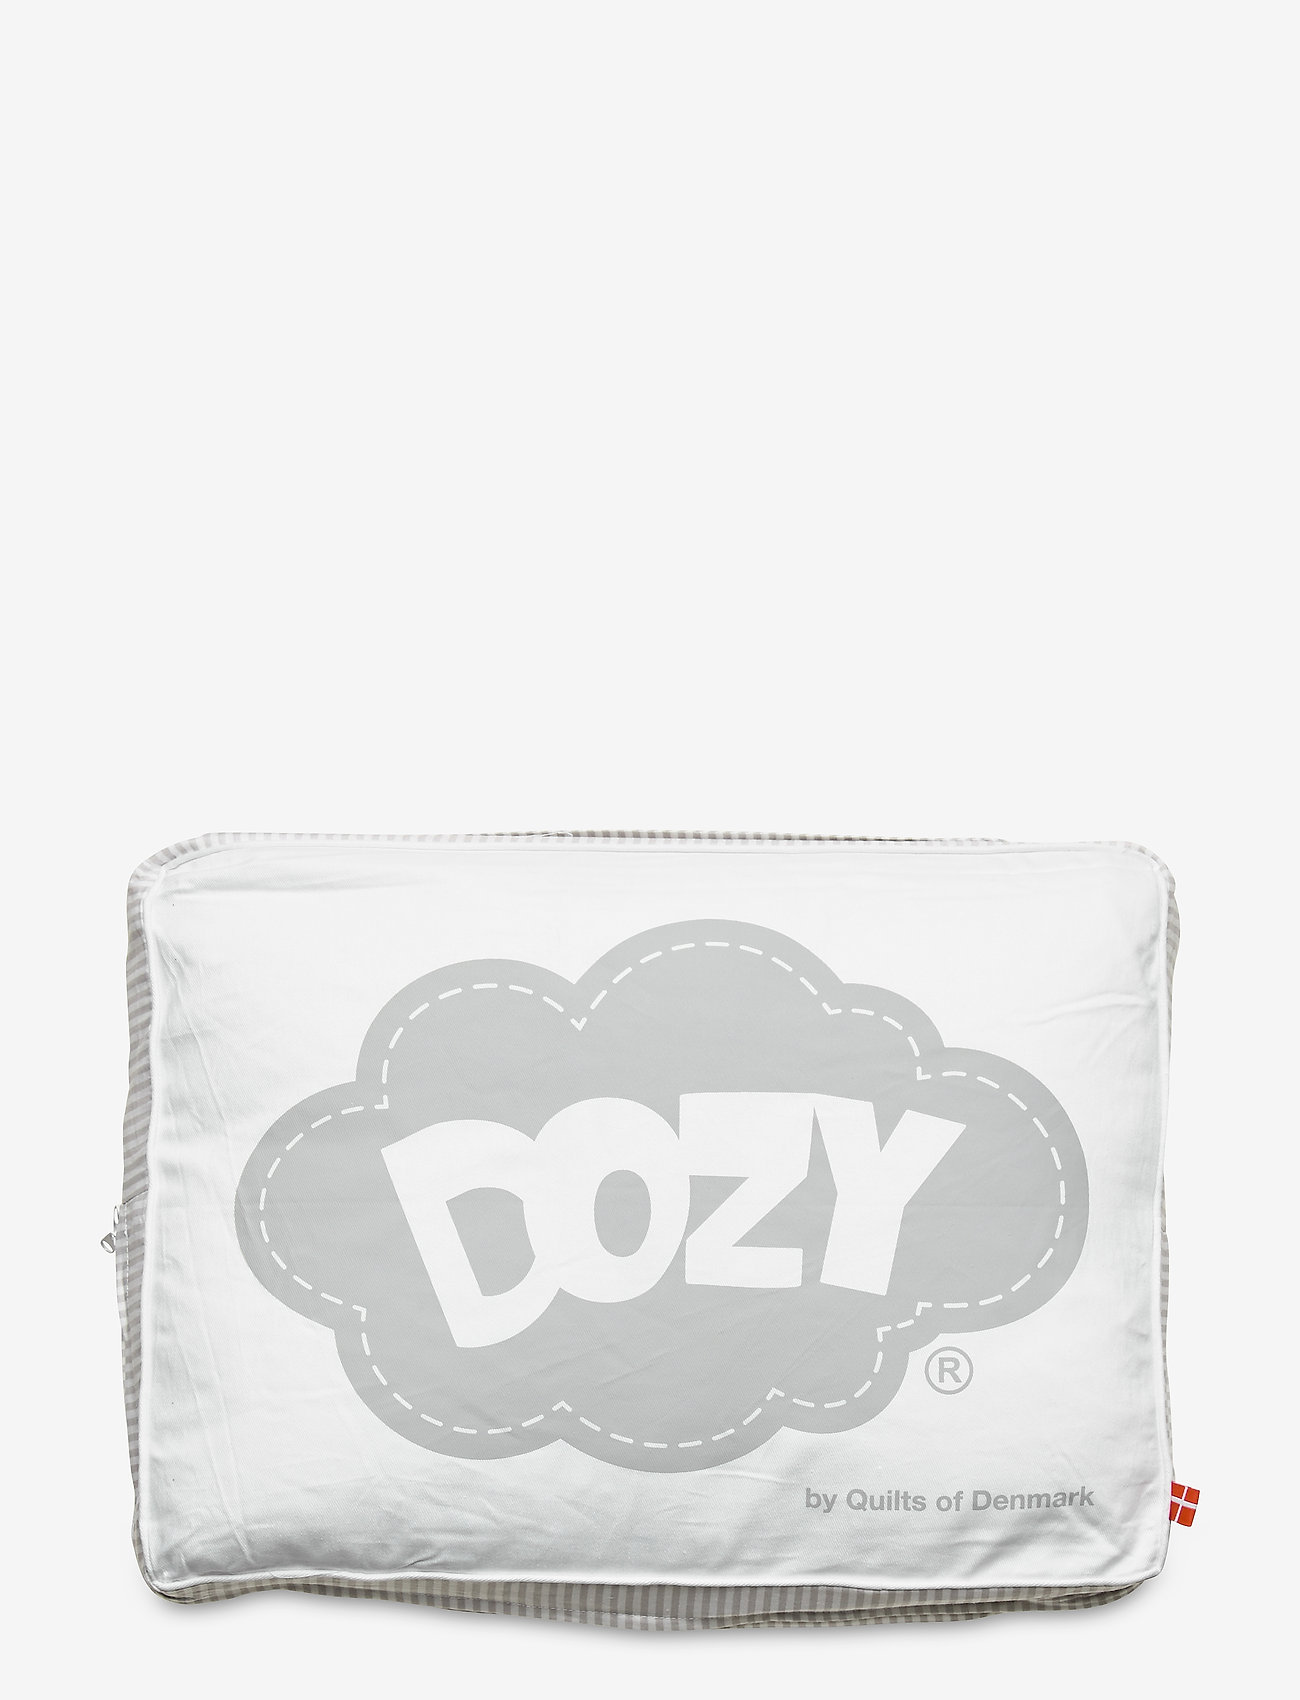 Dozy - Muscovy Down Baby Duvet - Winter Edition - duvets - white - 1